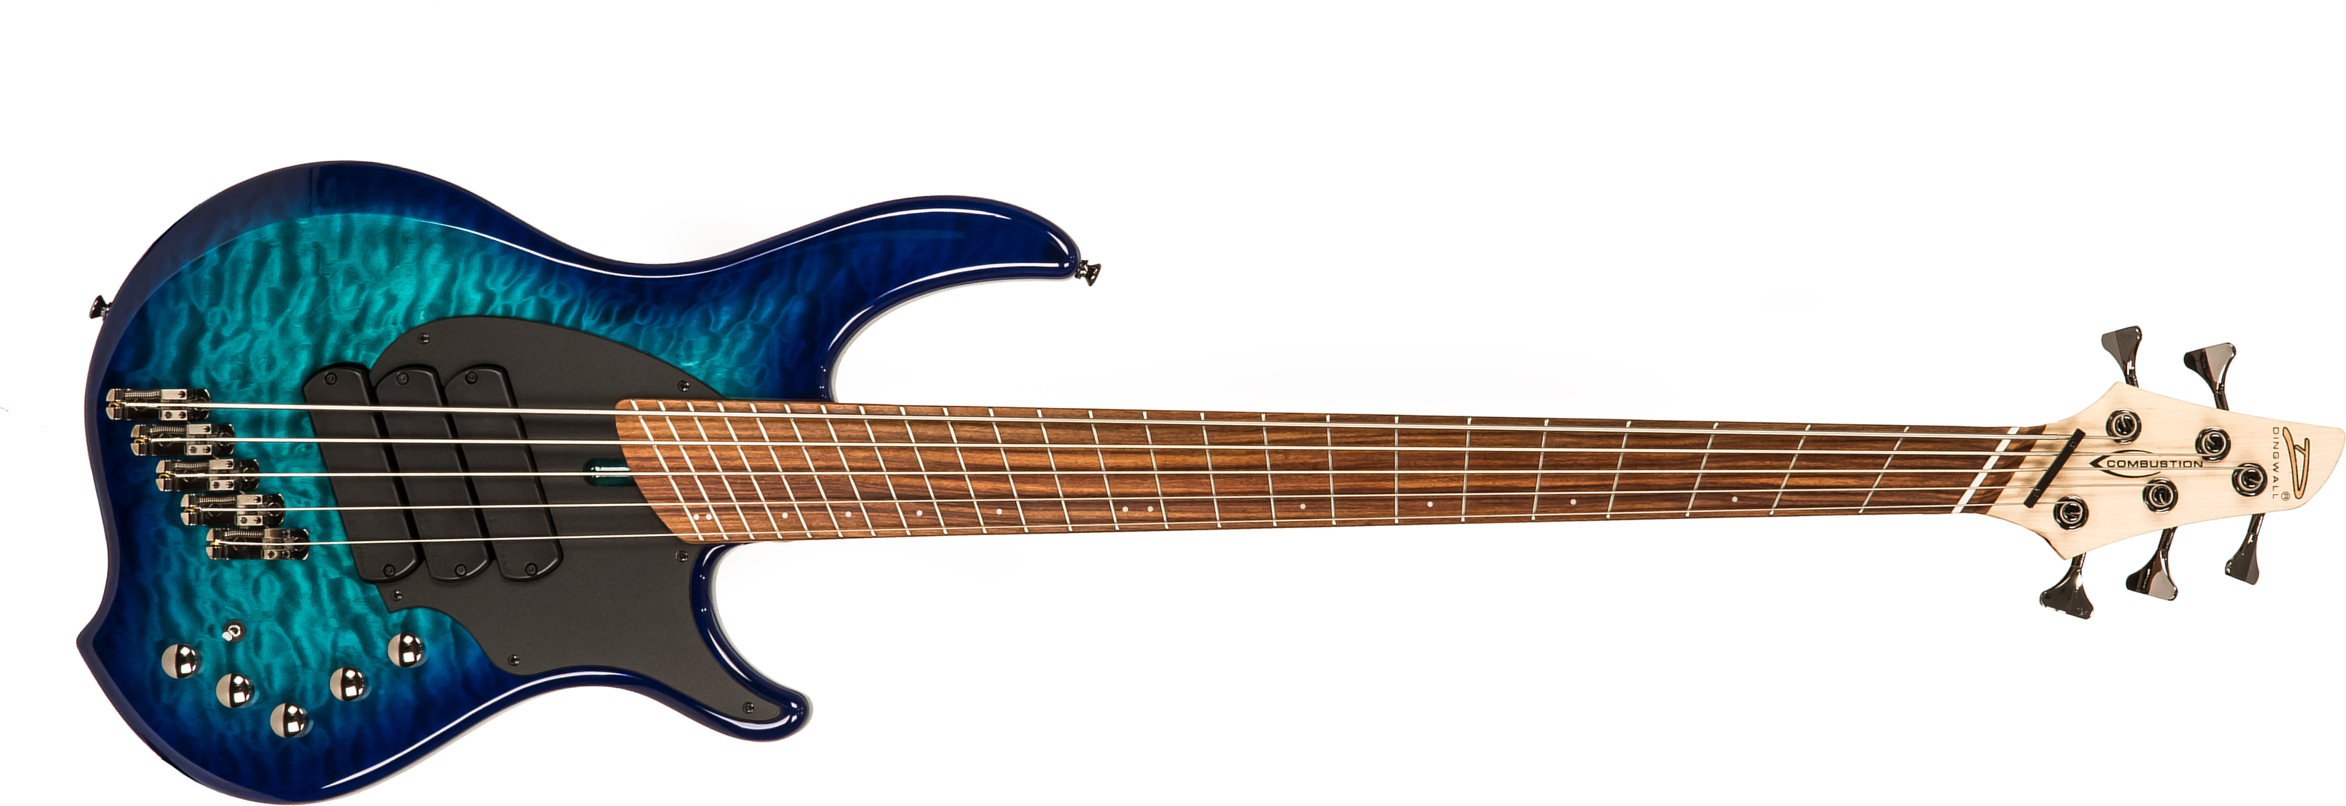 Dingwall Combustion 5 3-pickups Pf +housse - Whalepool Burst - Solidbody E-bass - Main picture